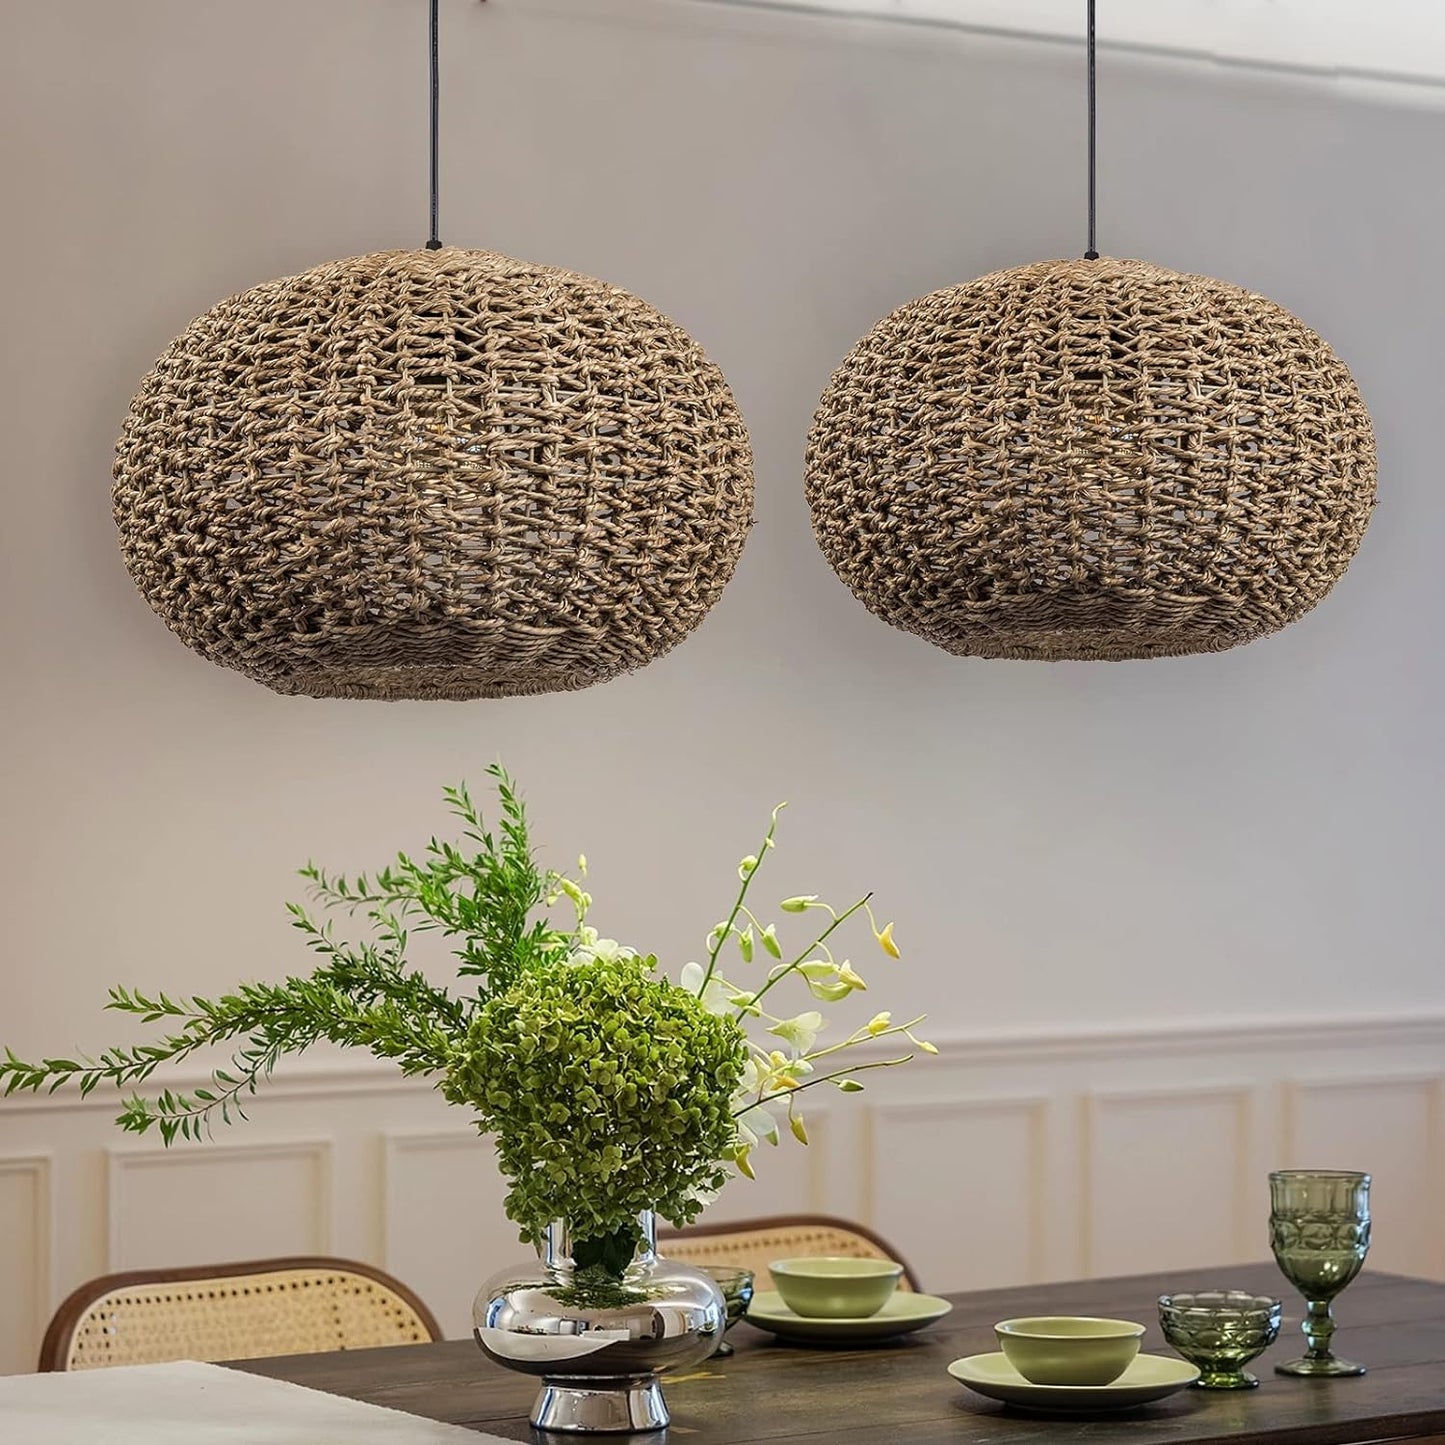 Arturesthome Rattan Chandelier, Handwoven Kitchen Pendant Lights, Wicker Lamp Shade Farmhouse Ceiling Lighting Fixtures, Country Weave Hanging Light for Foyer Nursery